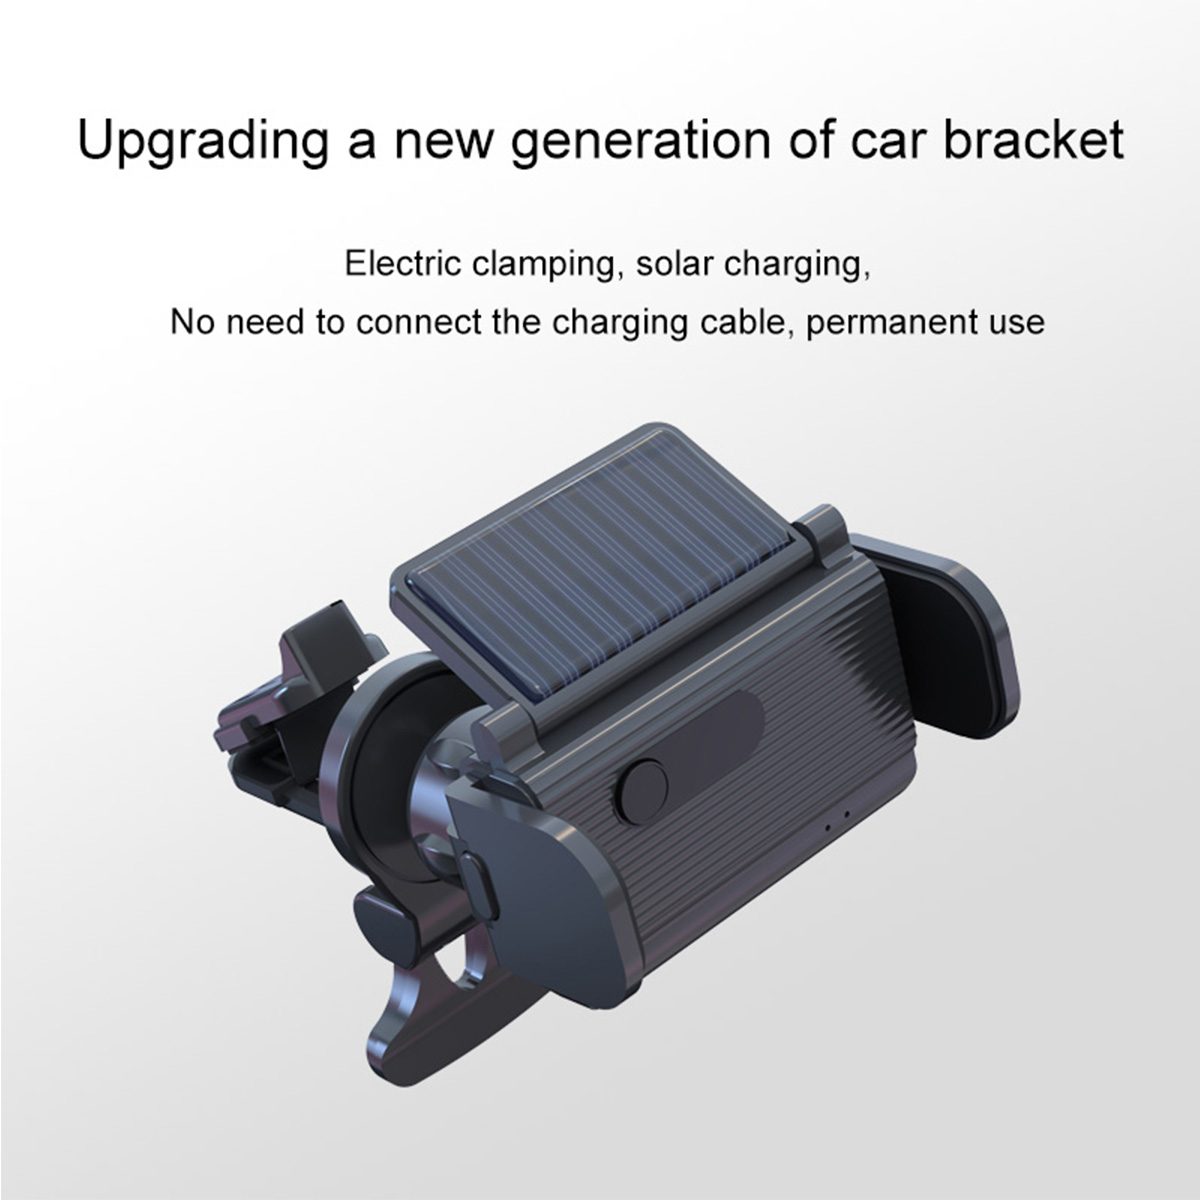 AUTSOME-300mAh-Car-Solar-Powered-Auto-Induction-Vehicle-Bracket-Mobile-Phone-Holder-Stand-for-iPhone-1885613-2